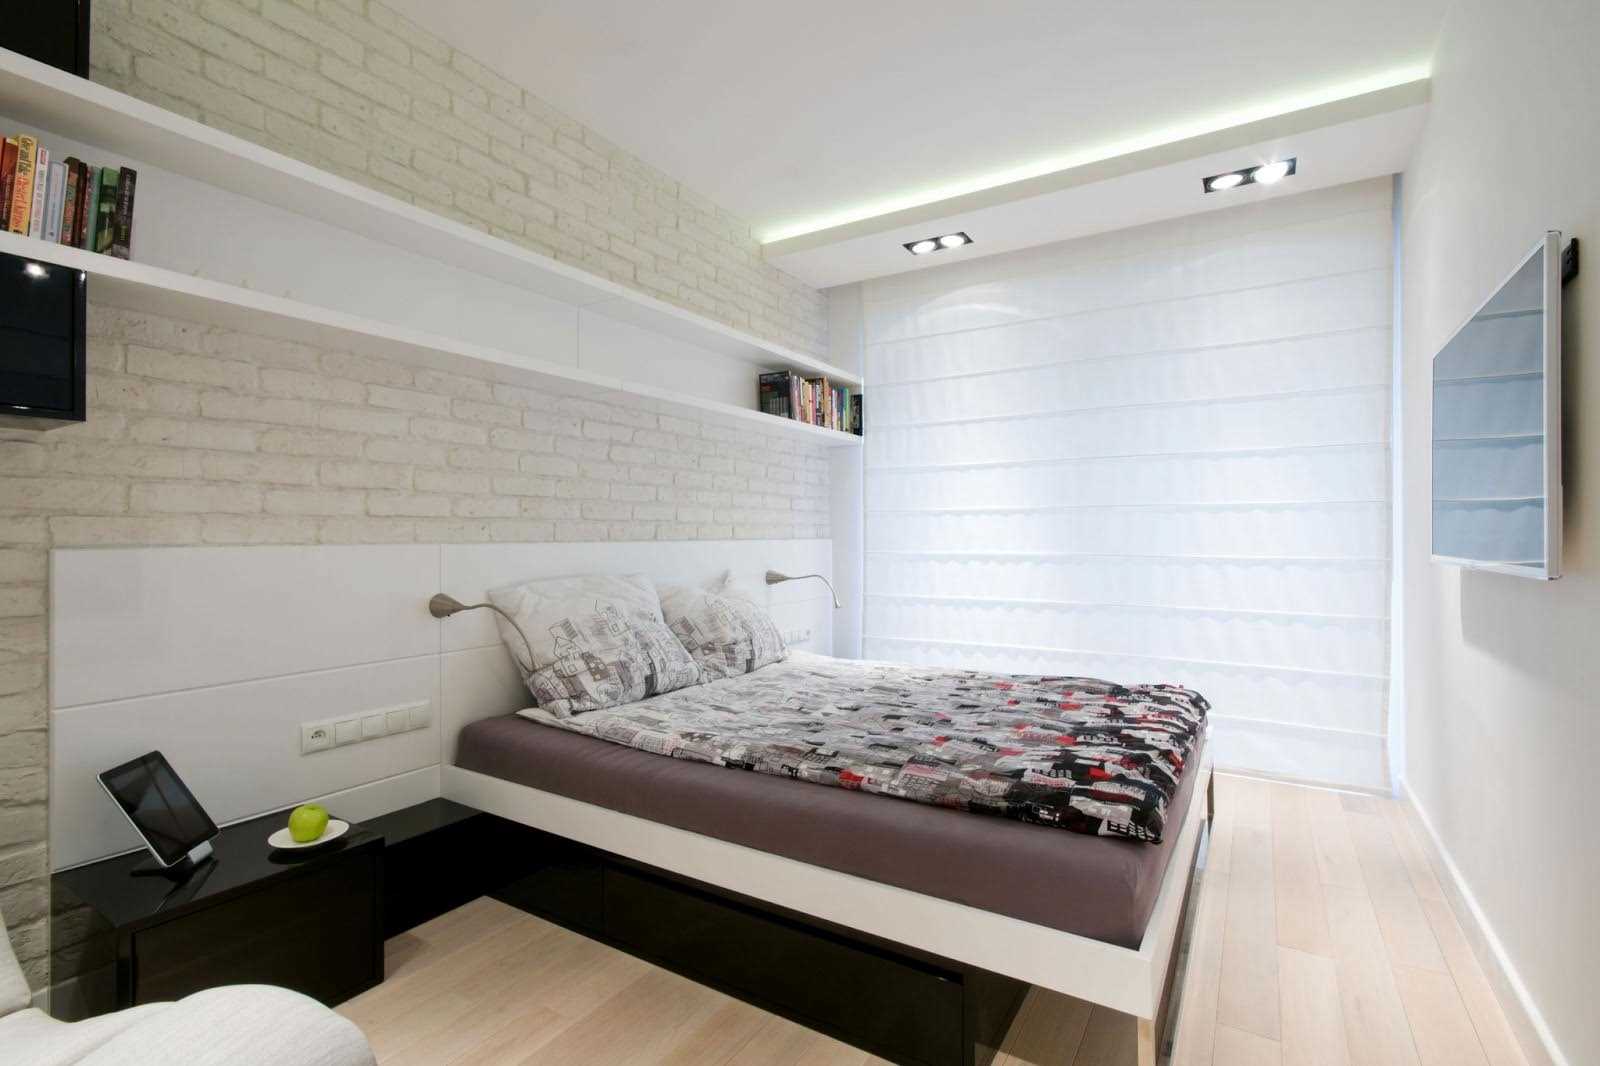 variant of a beautiful bedroom style in white